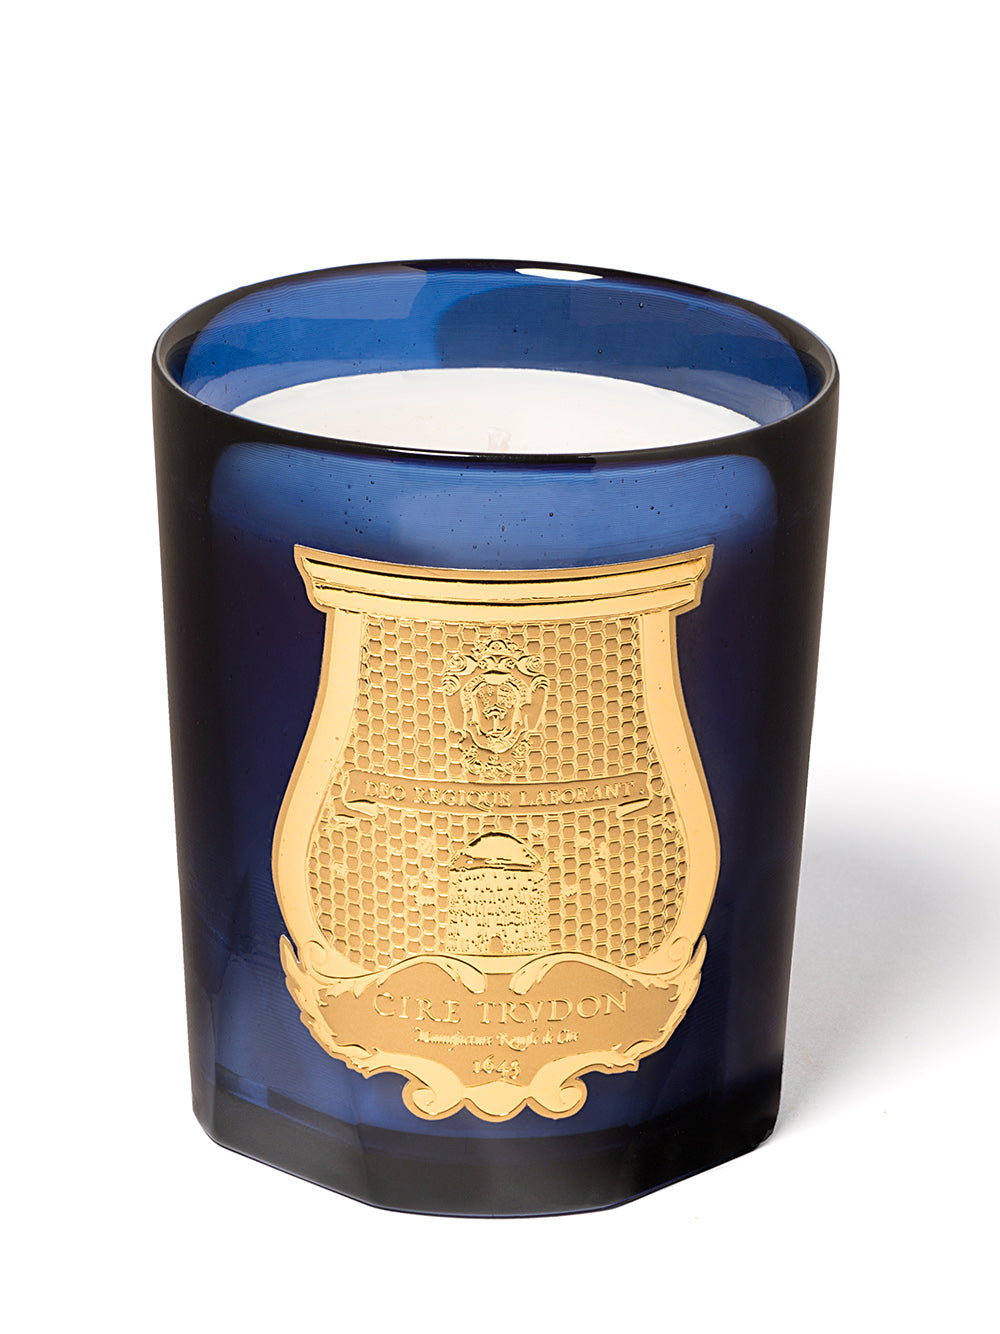 CIRE TRUDON CANDLE 270g Salta Limited Edition